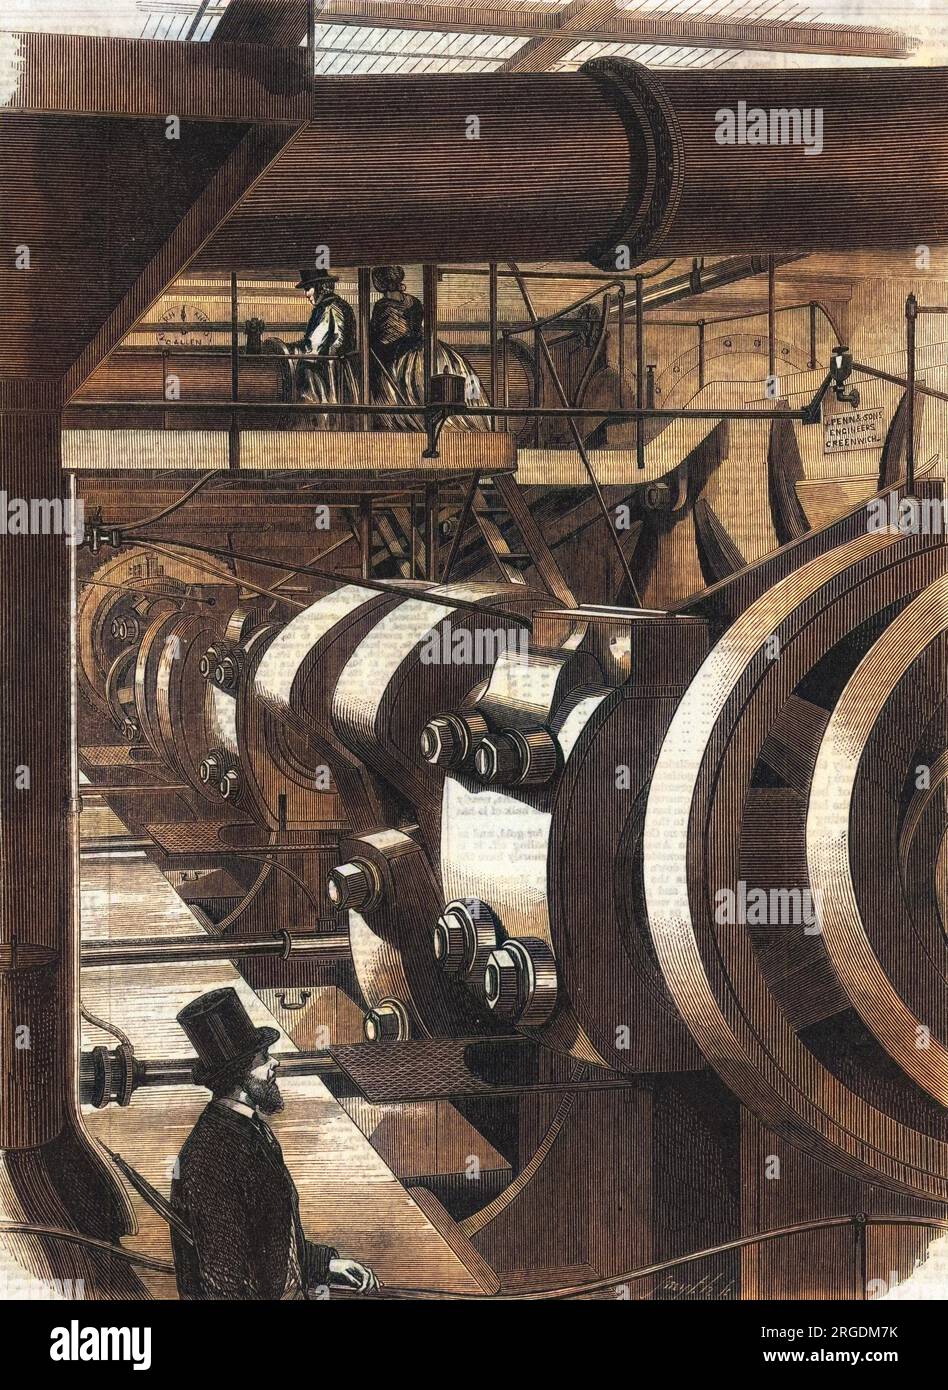 The engine room of the iron-clad warship H.M.S. Warrior Stock Photo